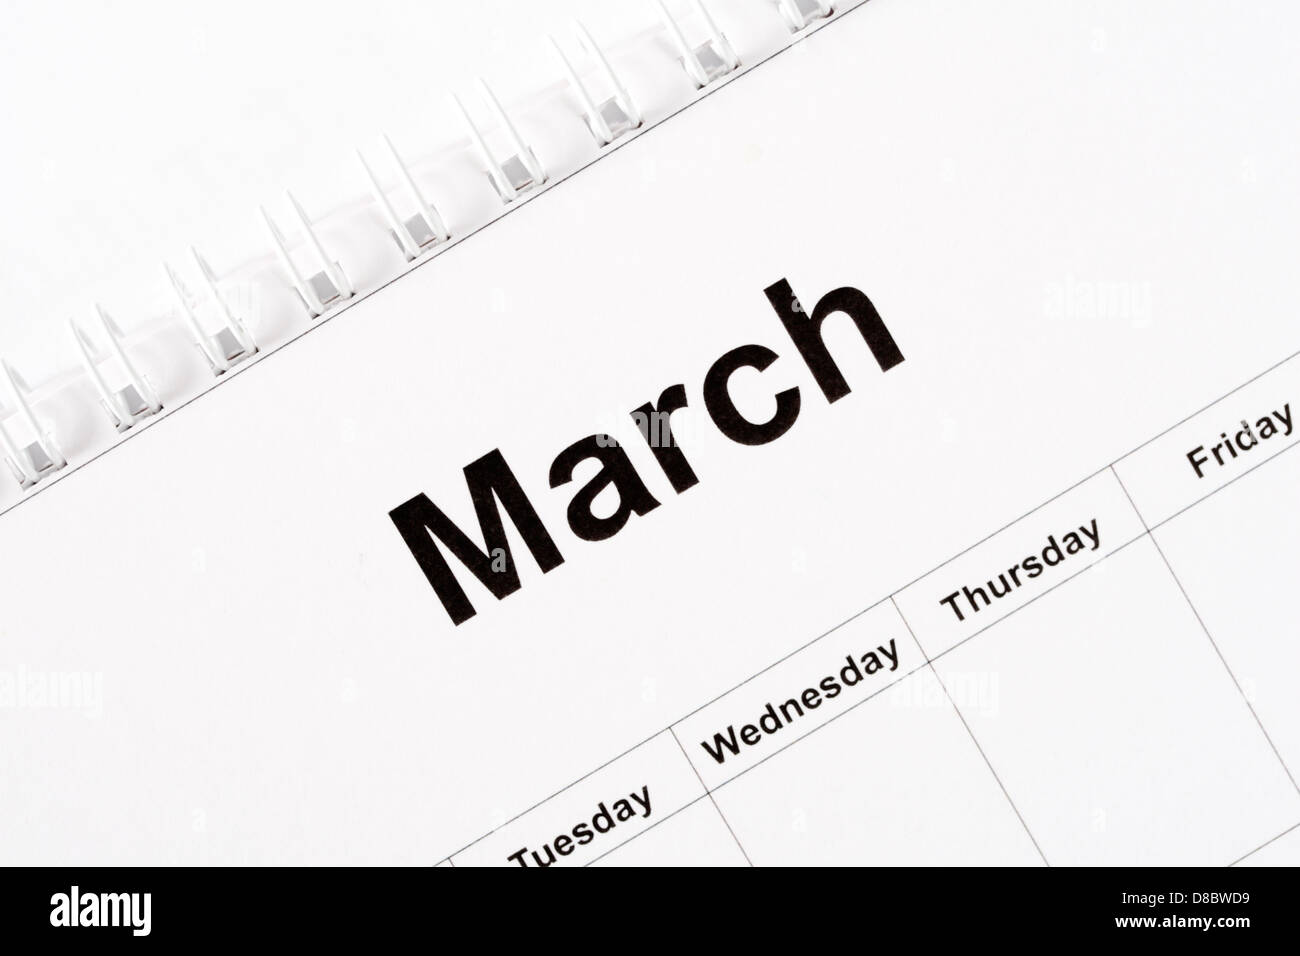 Calendar month of March Stock Photo